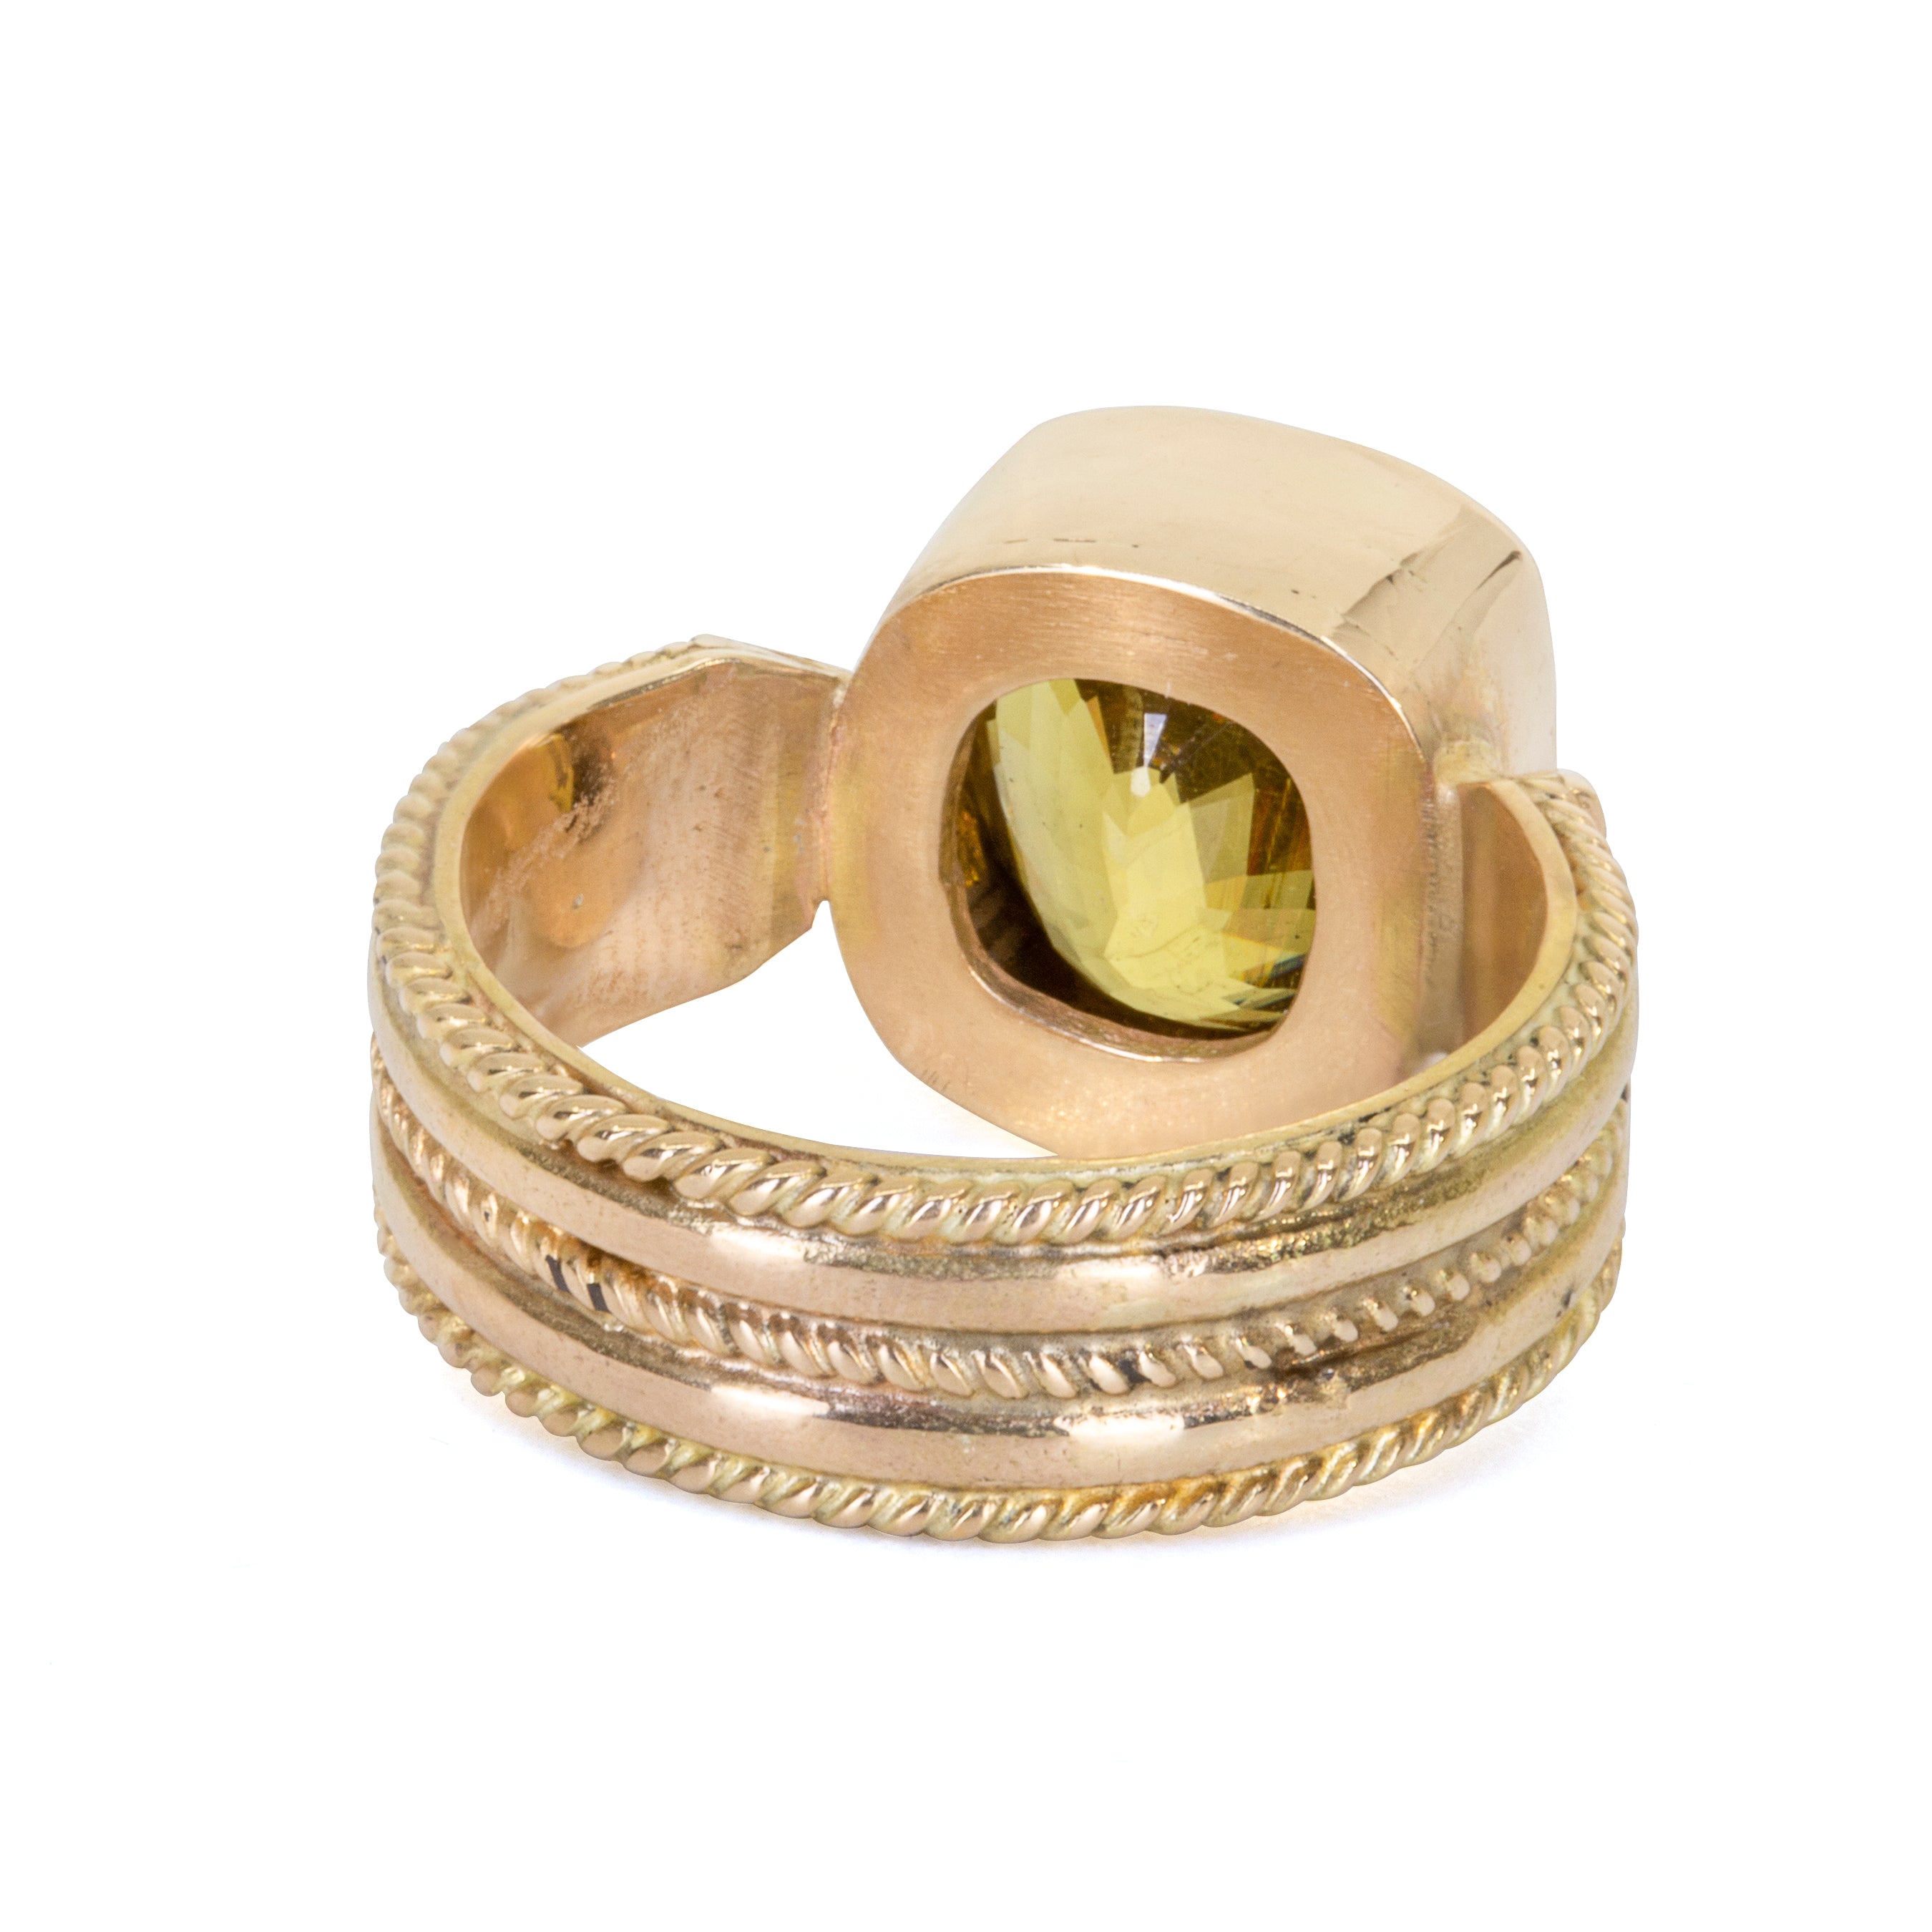 Sphene 6.64 Carat Square Faceted 14k Braided Band Handcrafted Gemstone Ring - eeo-026 - Crystalarium